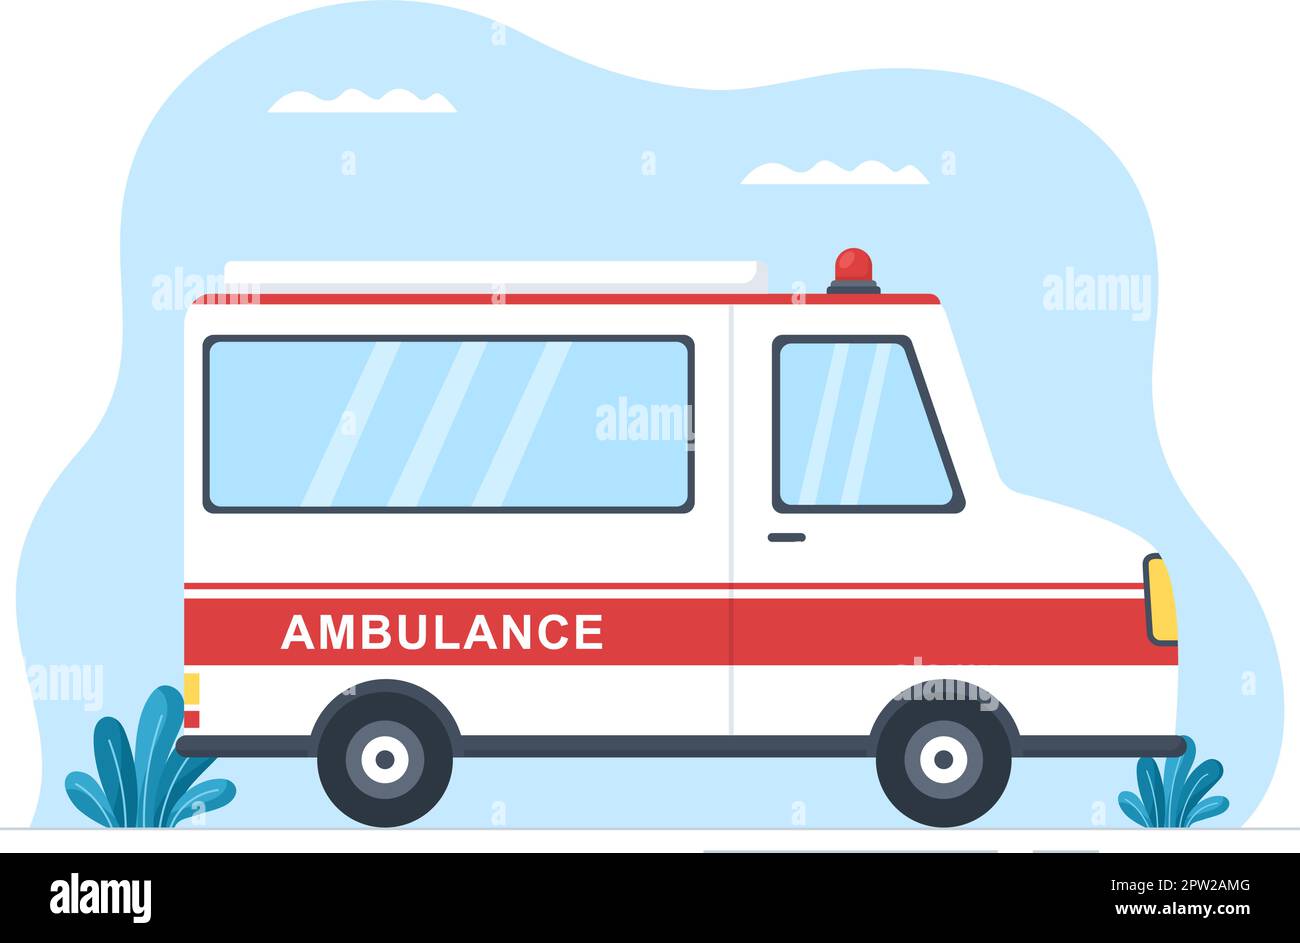 Medical Vehicle Ambulance Car or Emergency Service for Pick Up Patient the Injured in an Accident in Flat Cartoon Hand Drawn Templates Illustration Stock Vector